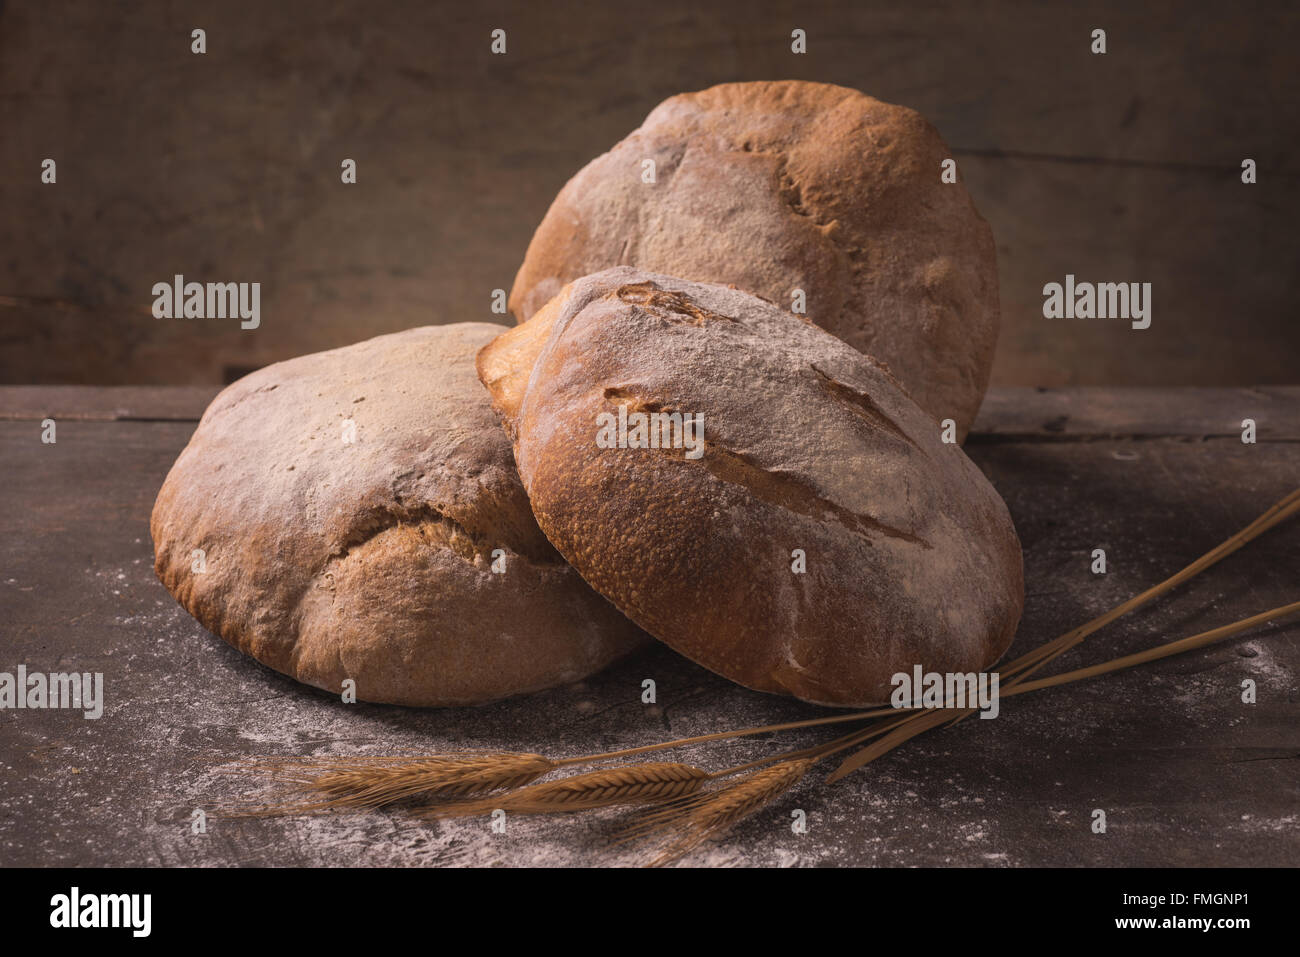 Rustic hand made wood oven baked bread Stock Photo